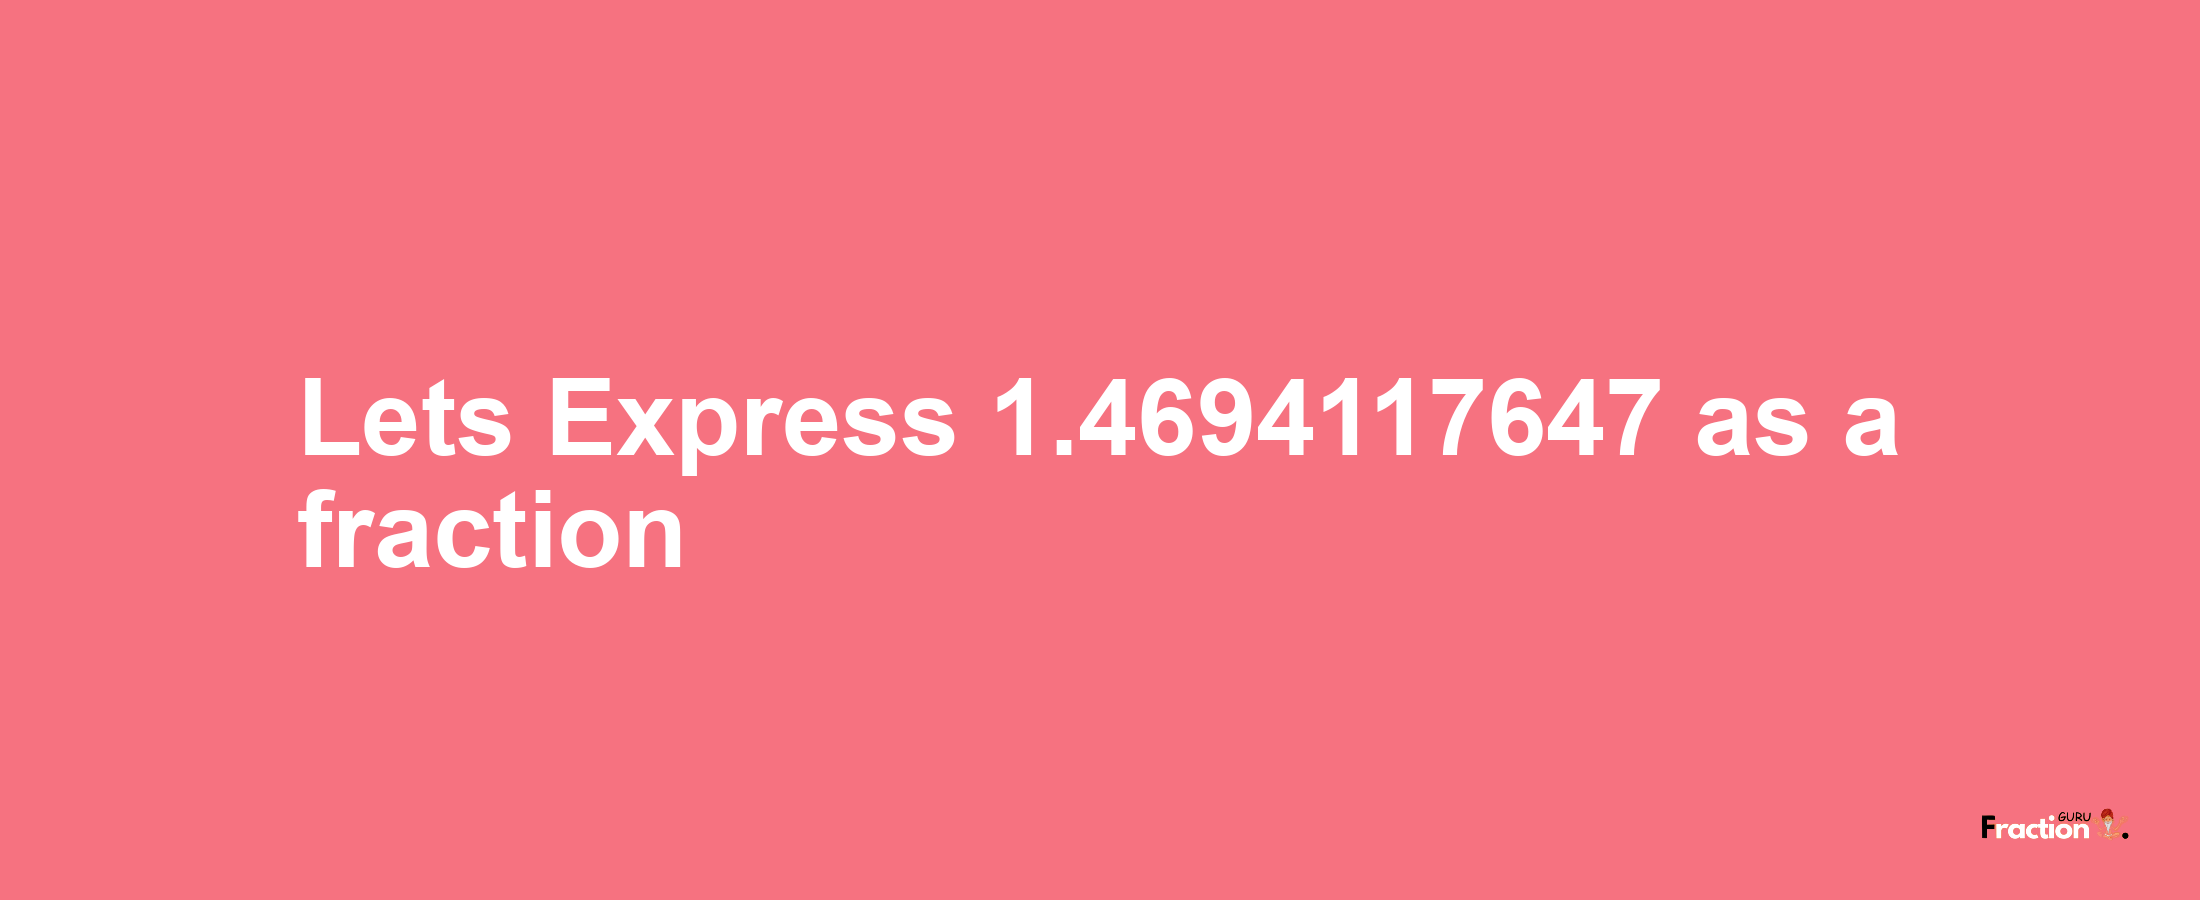 Lets Express 1.4694117647 as afraction